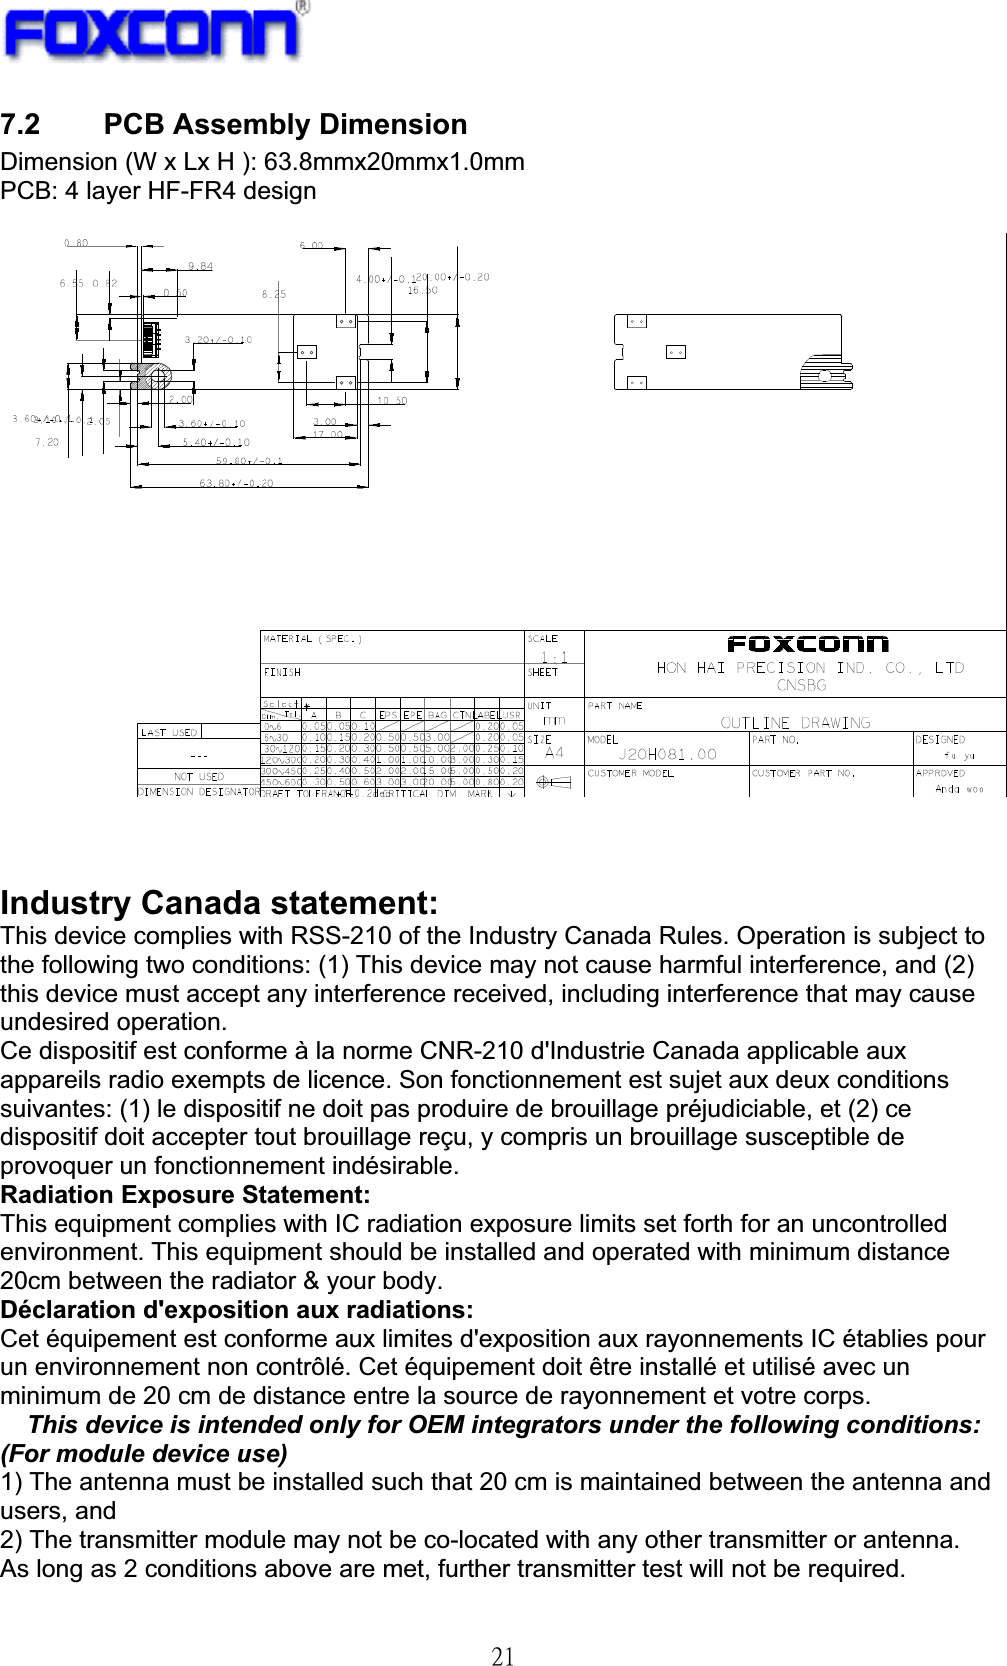 !32!7.2 PCB Assembly Dimension Dimension (W x Lx H ): 63.8mmx20mmx1.0mm PCB: 4 layer HF-FR4 design Industry Canada statement: This device complies with RSS-210 of the Industry Canada Rules. Operation is subject to the following two conditions: (1) This device may not cause harmful interference, and (2) this device must accept any interference received, including interference that may cause undesired operation. Ce dispositif est conforme à la norme CNR-210 d&apos;Industrie Canada applicable aux appareils radio exempts de licence. Son fonctionnement est sujet aux deux conditions suivantes: (1) le dispositif ne doit pas produire de brouillage préjudiciable, et (2) ce dispositif doit accepter tout brouillage reçu, y compris un brouillage susceptible de provoquer un fonctionnement indésirable. Radiation Exposure Statement: This equipment complies with IC radiation exposure limits set forth for an uncontrolled environment. This equipment should be installed and operated with minimum distance 20cm between the radiator &amp; your body. Déclaration d&apos;exposition aux radiations: Cet équipement est conforme aux limites d&apos;exposition aux rayonnements IC établies pour un environnement non contrôlé. Cet équipement doit être installé et utilisé avec un minimum de 20 cm de distance entre la source de rayonnement et votre corps. This device is intended only for OEM integrators under the following conditions: (For module device use) 1) The antenna must be installed such that 20 cm is maintained between the antenna and users, and 2) The transmitter module may not be co-located with any other transmitter or antenna. As long as 2 conditions above are met, further transmitter test will not be required. 